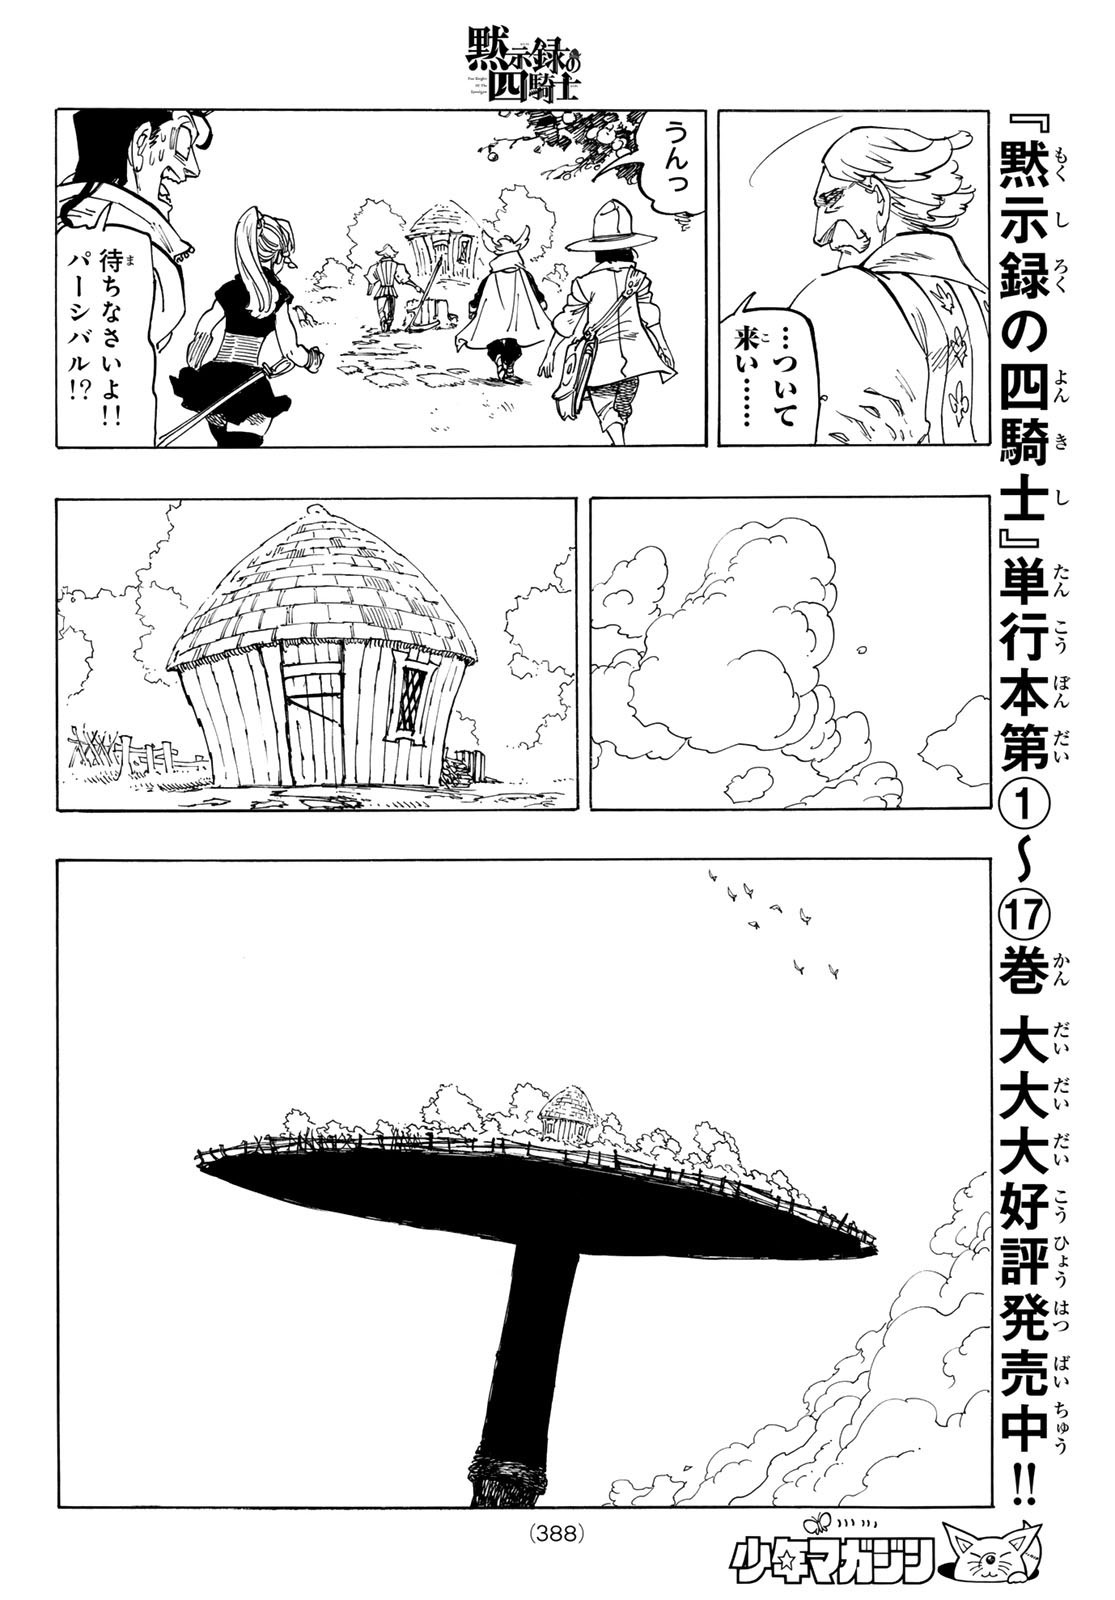 Weekly Shōnen Magazine - 週刊少年マガジン - Chapter 2024-33 - Page 386